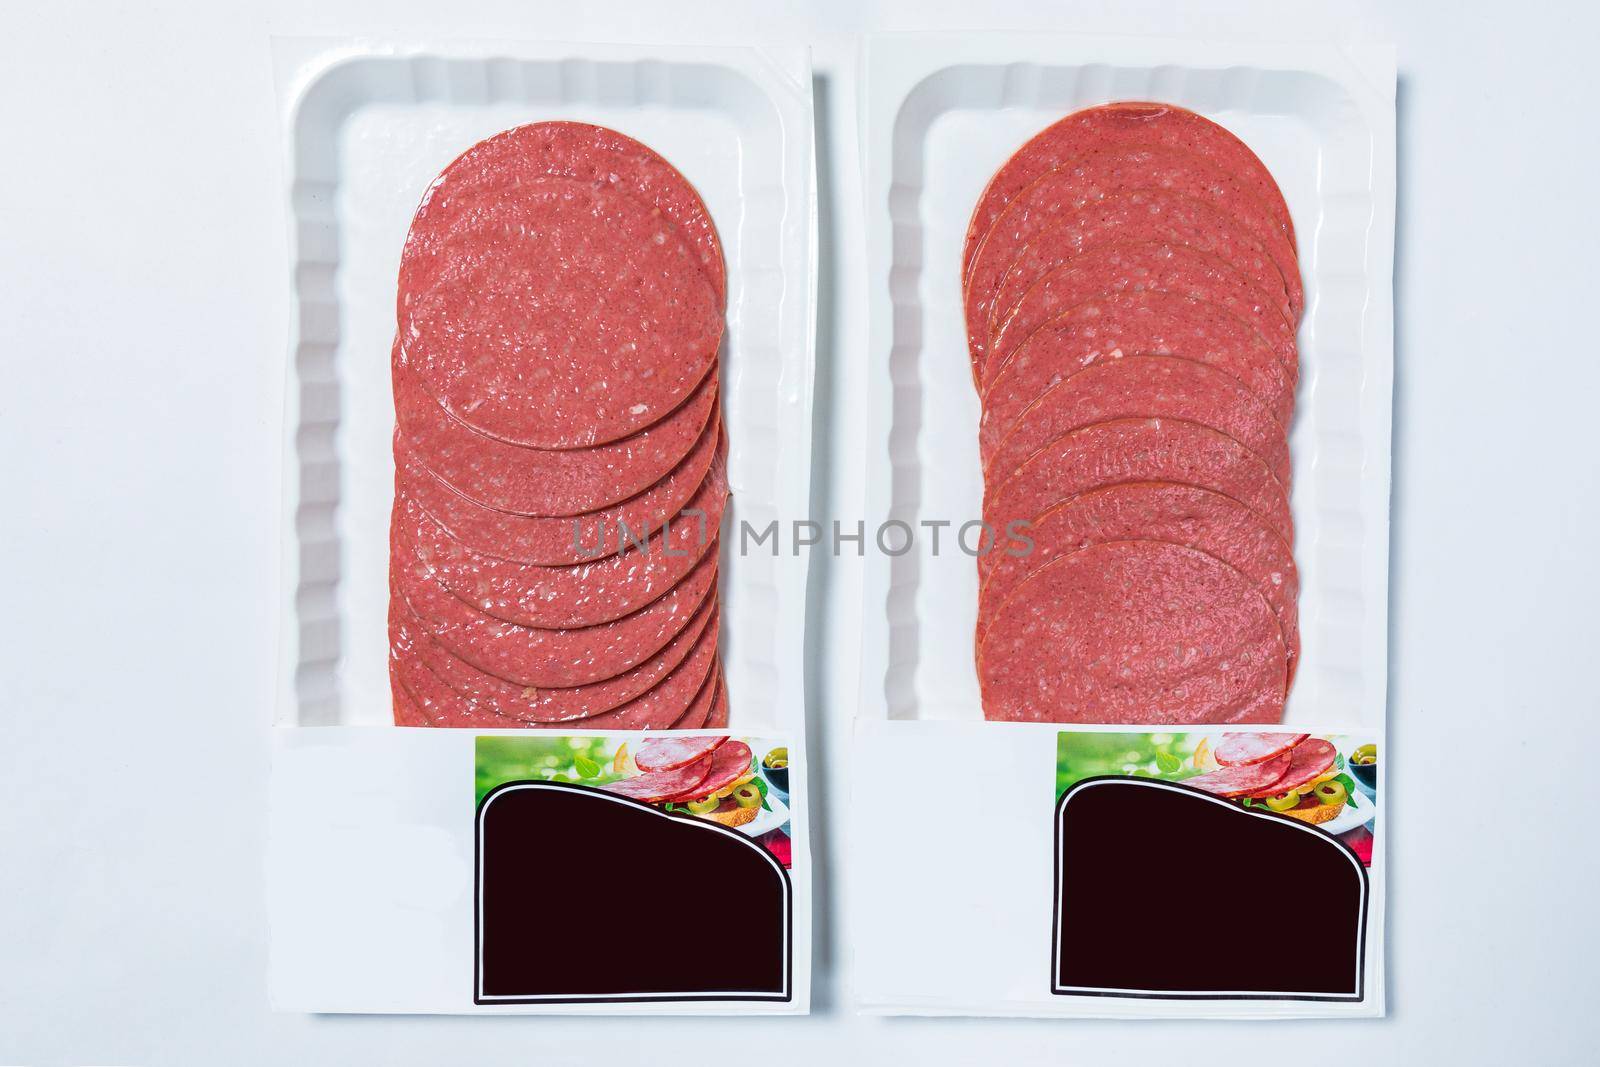 Sausage, salami product, ready for sale on the white background by ferhad